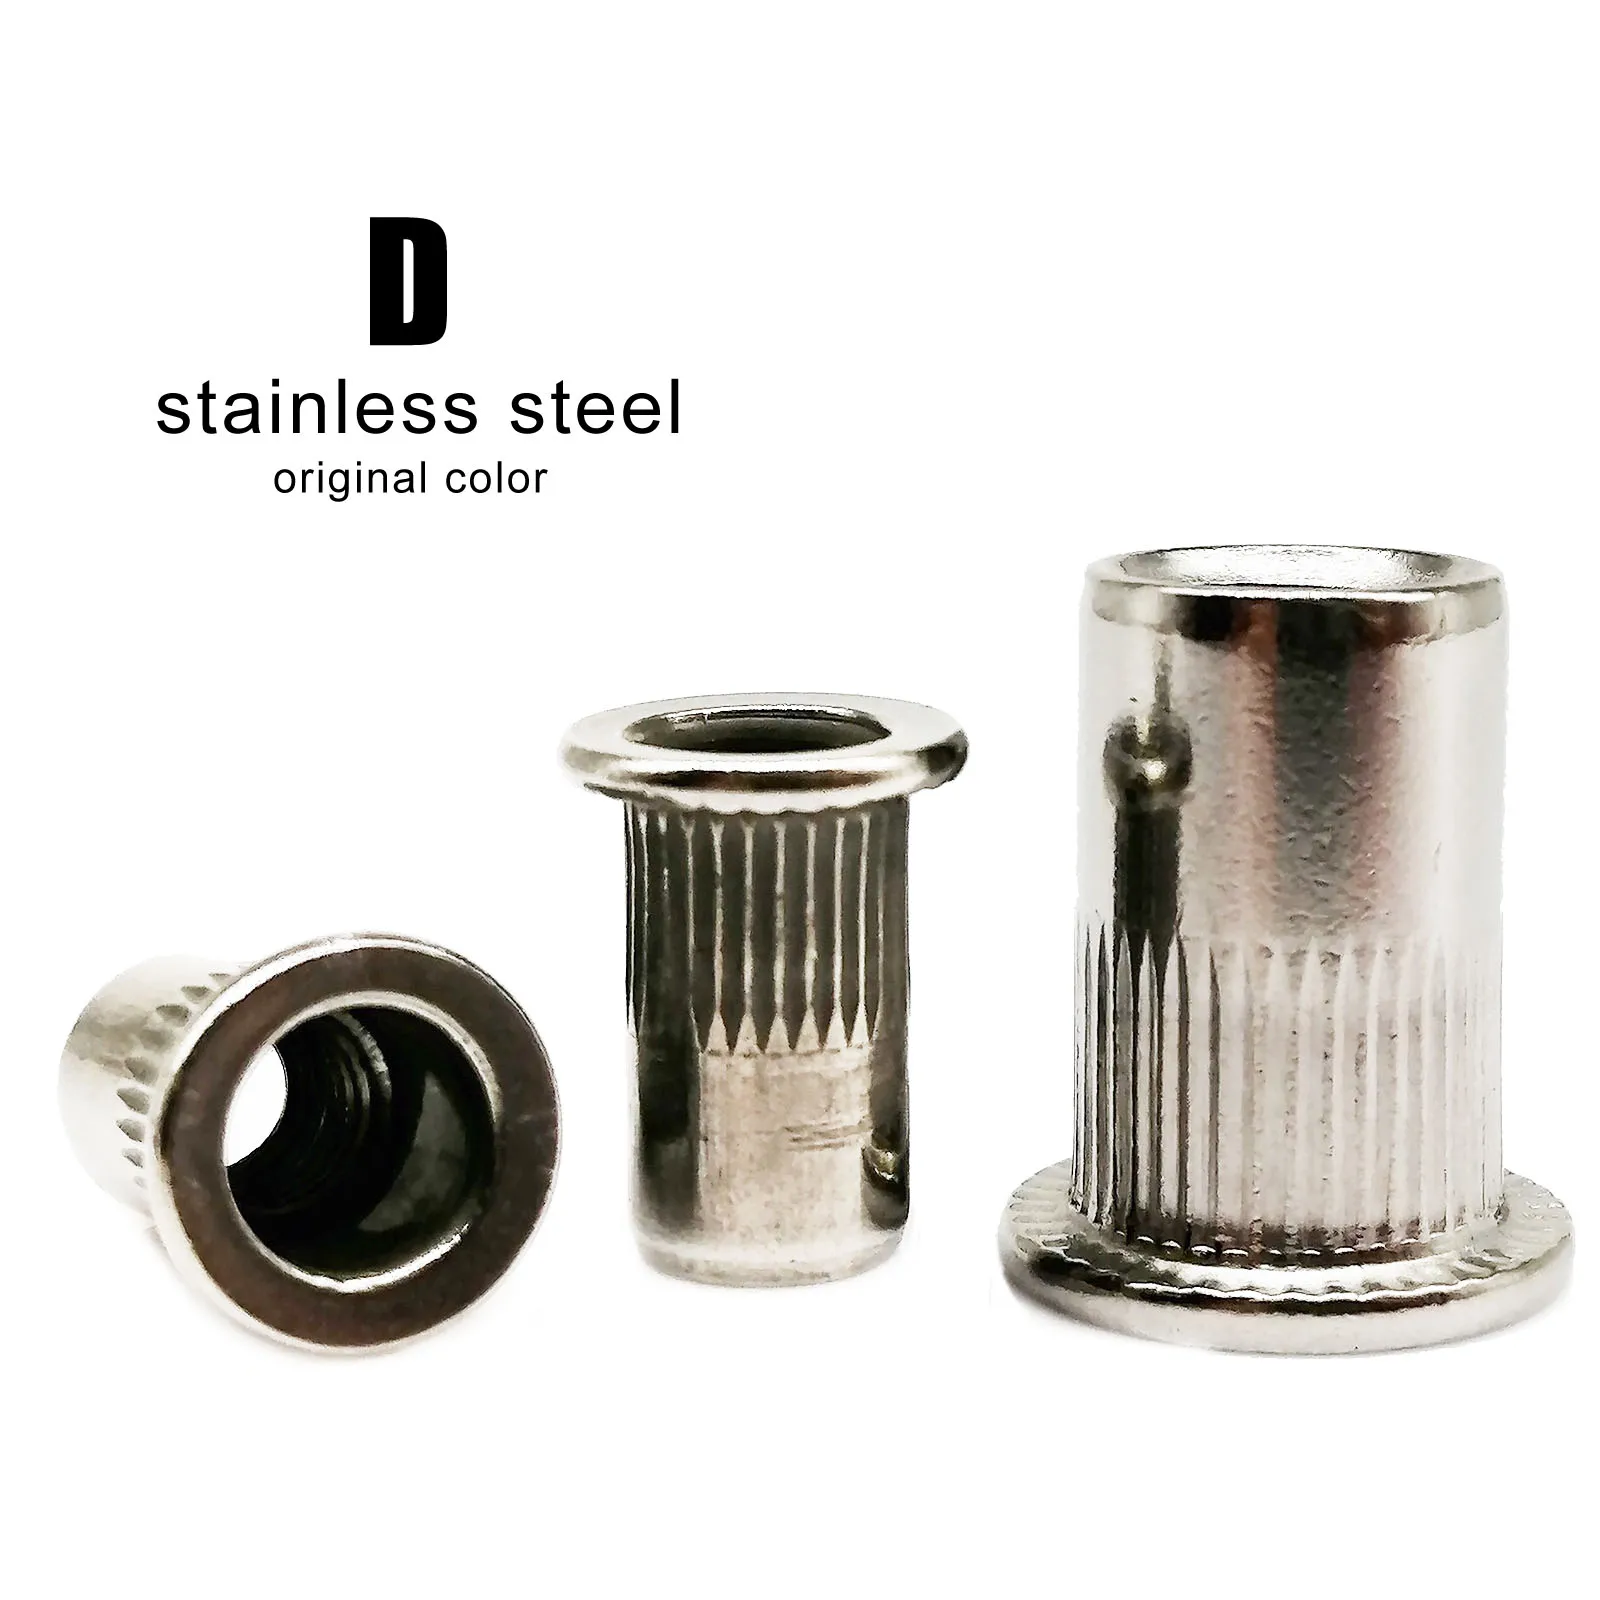 D stainless steel